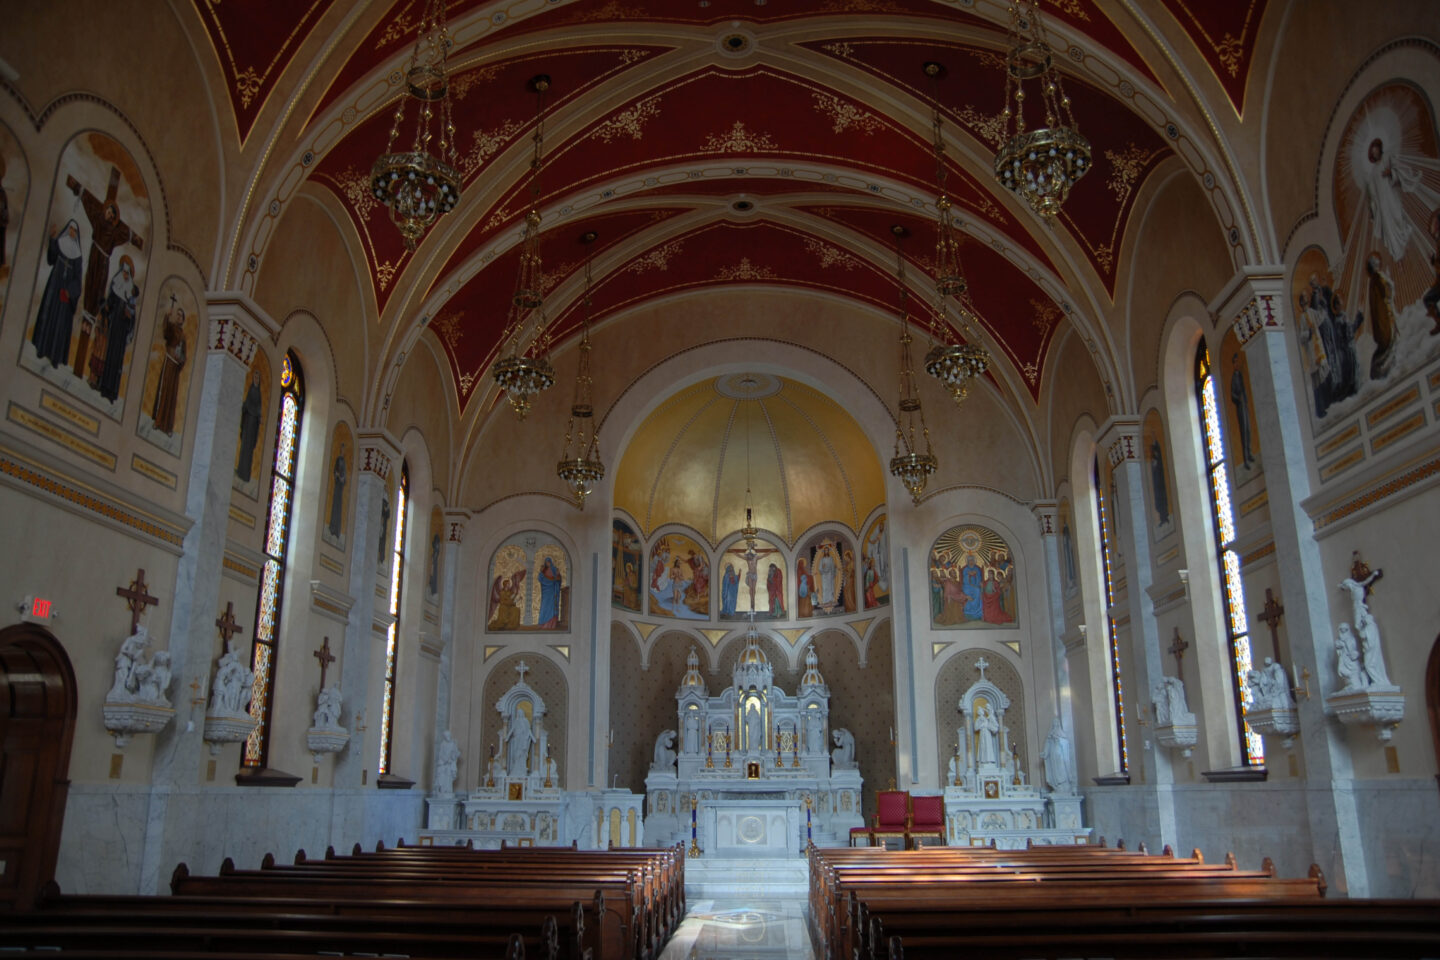 View of a soaring sanctuary filled with imagery and detail at Sacred Heart Catholic Church